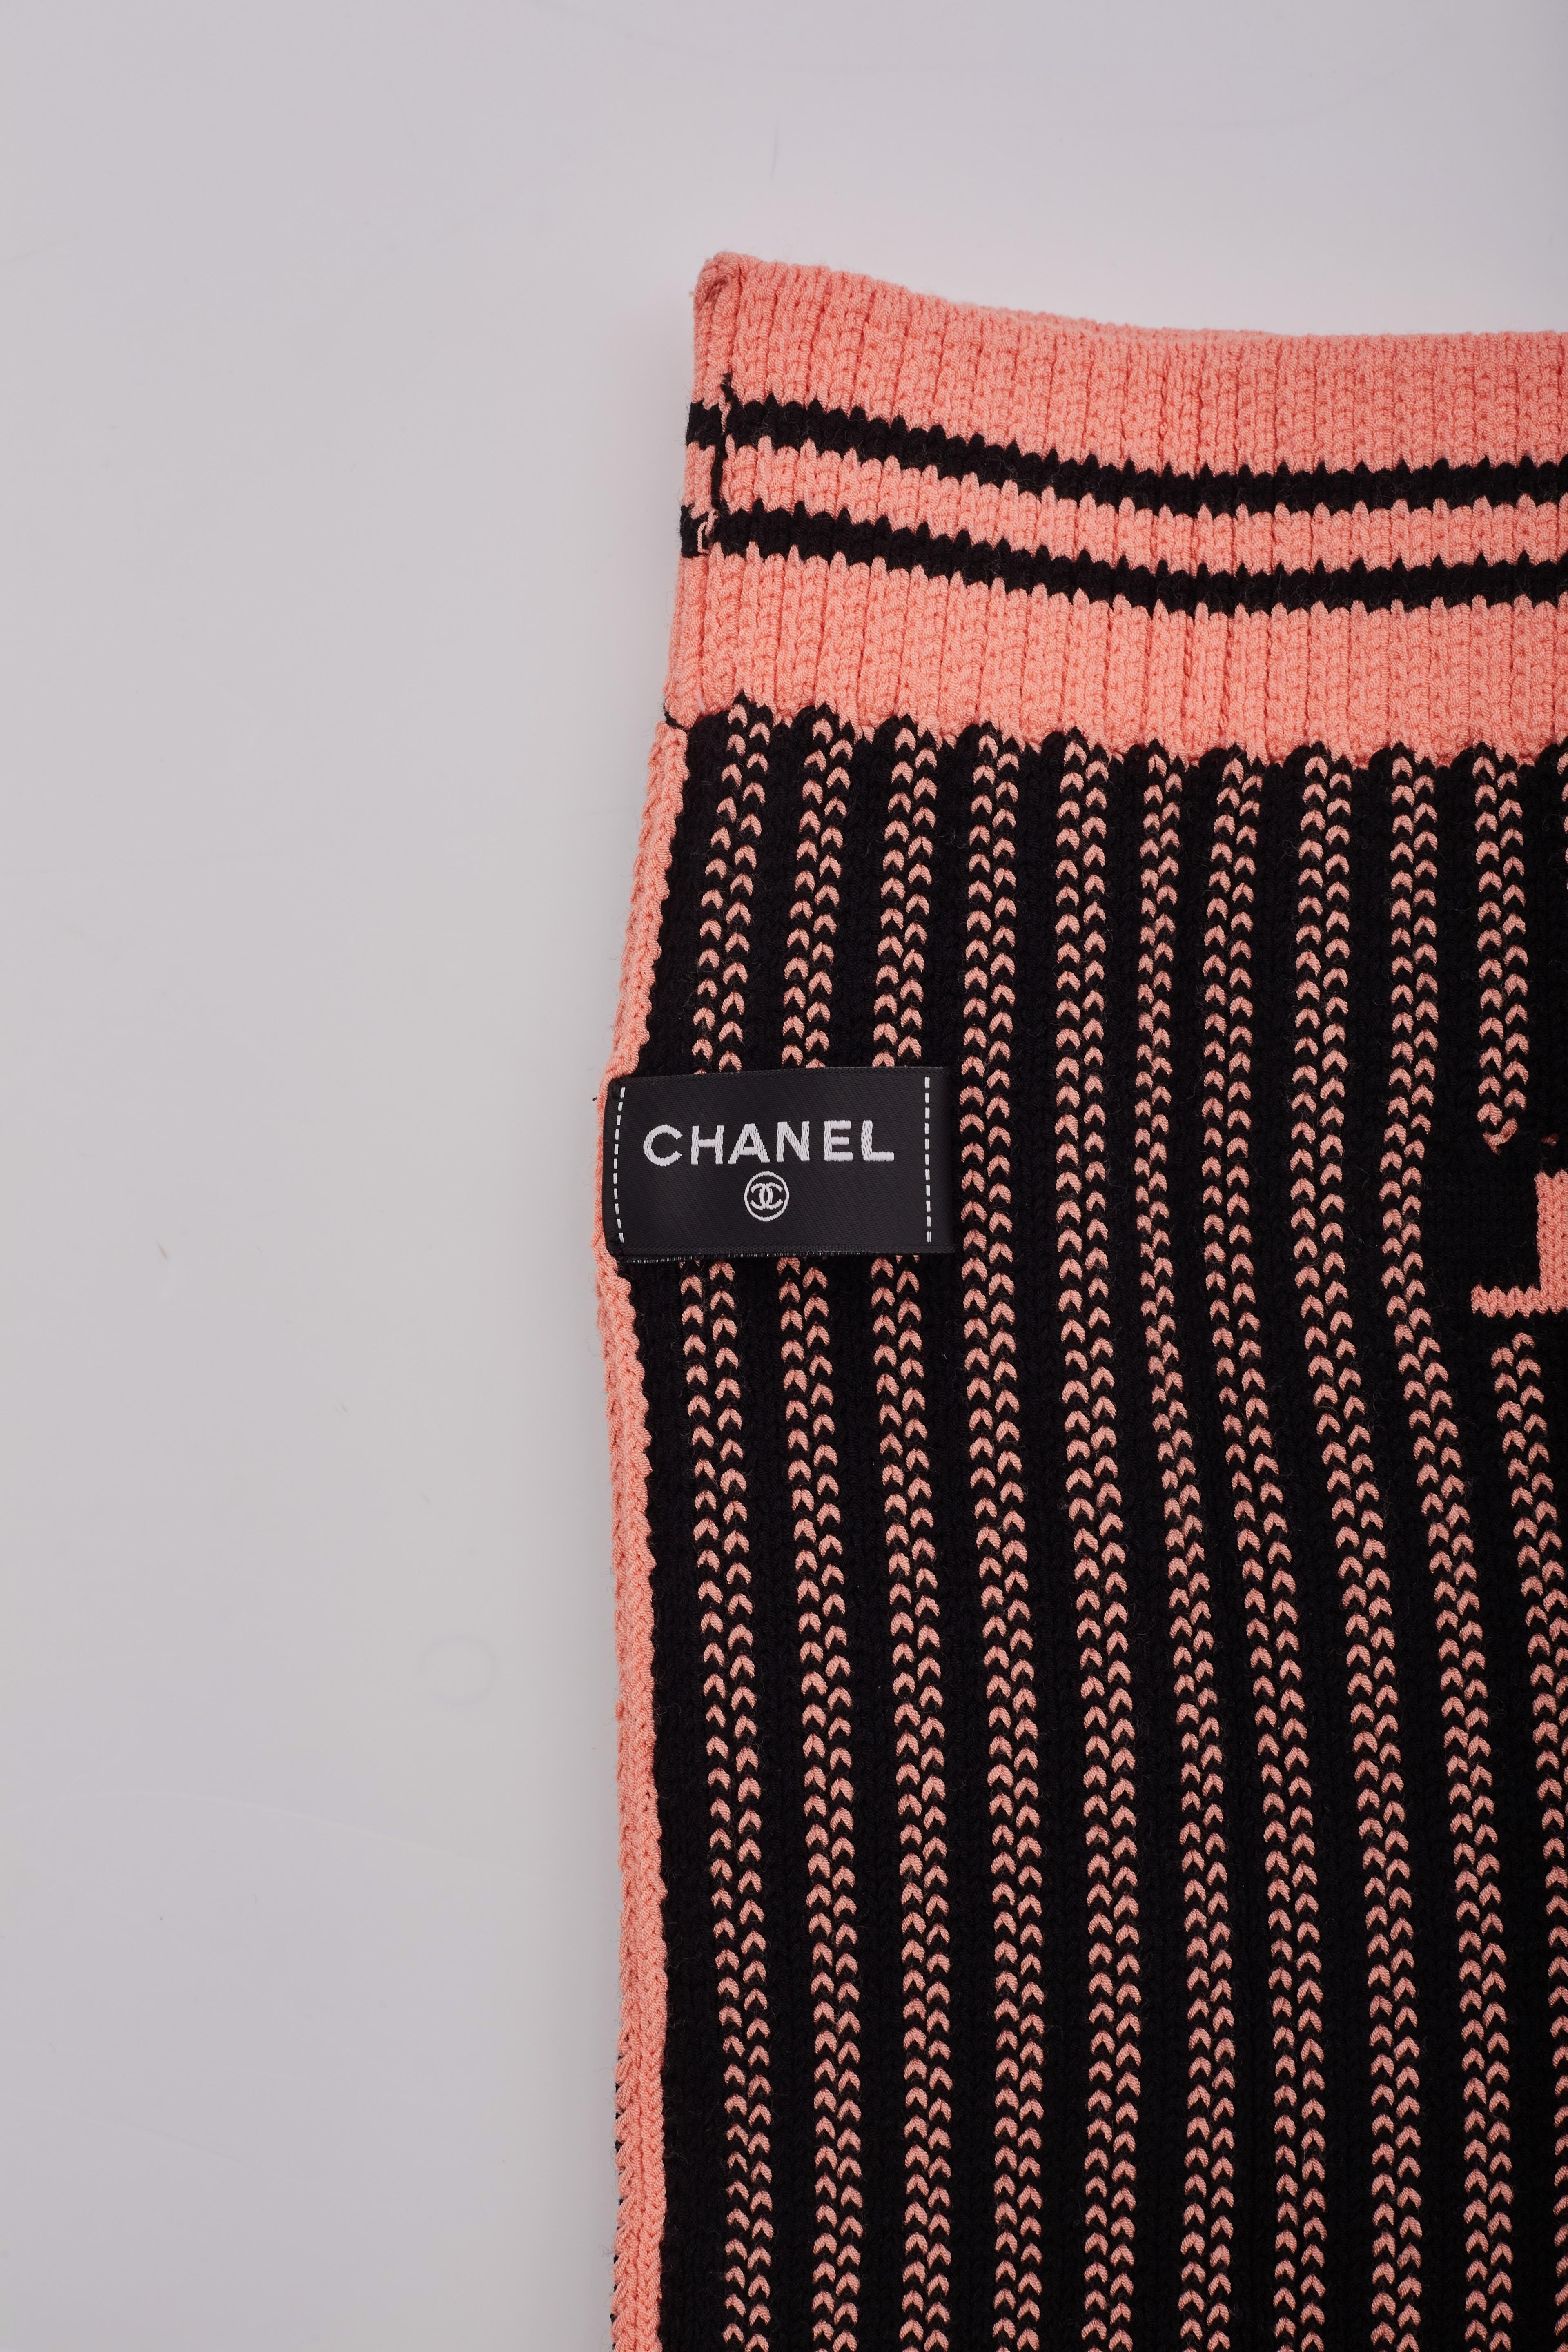 Chanel Logo Apricot Knit Leg Warmers Gaiters For Sale 2